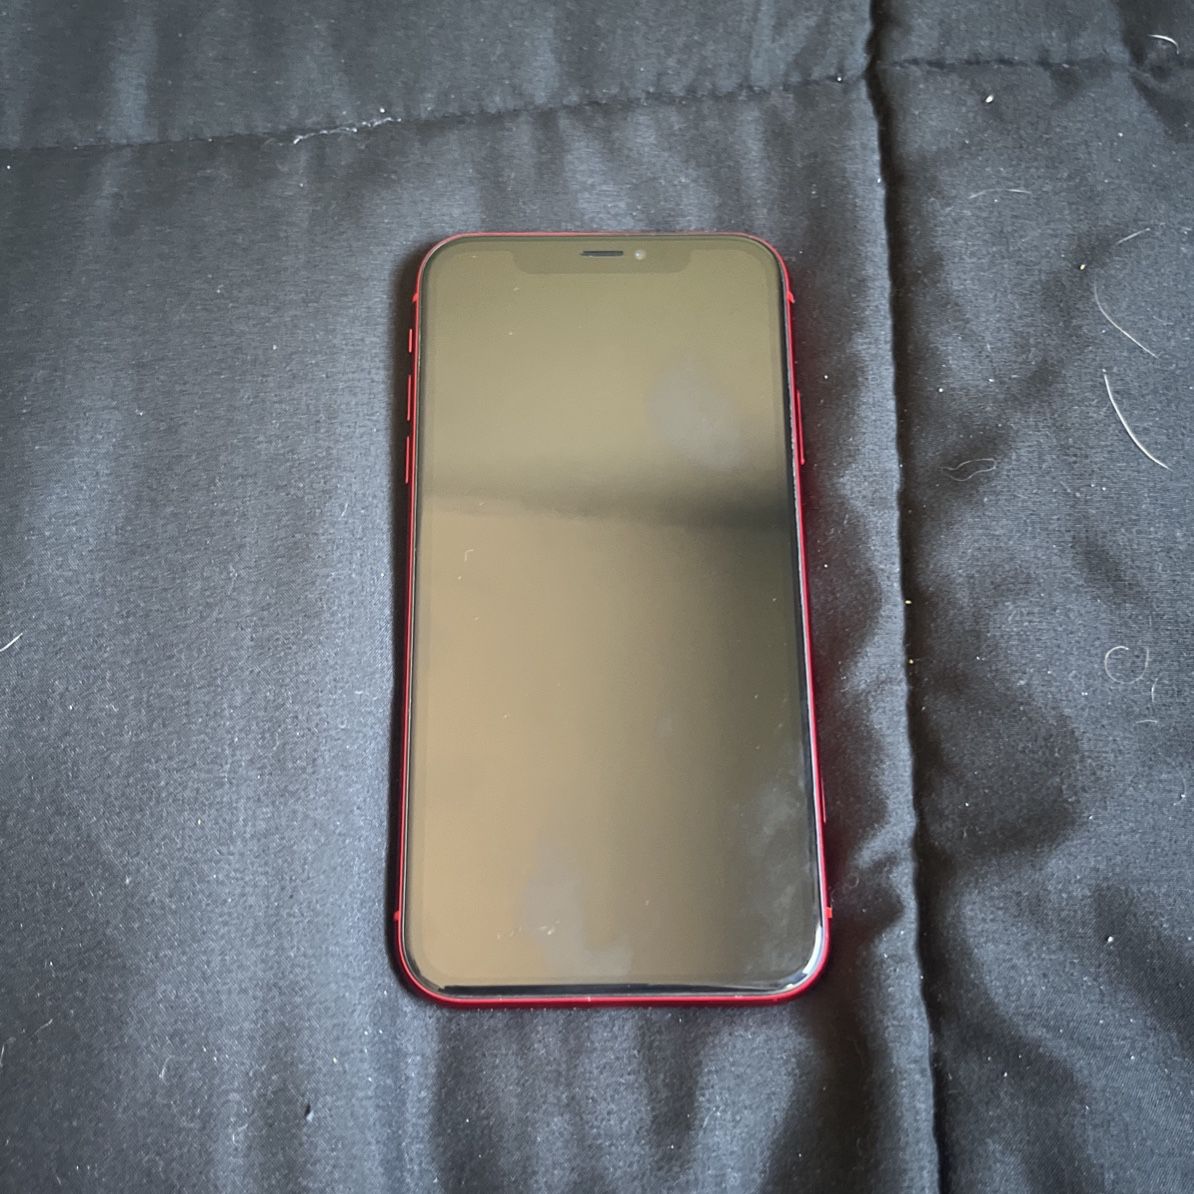 IPHONE XR Reset Used Like New No Box Comes With Charger/apple Headphones Good Conditions 